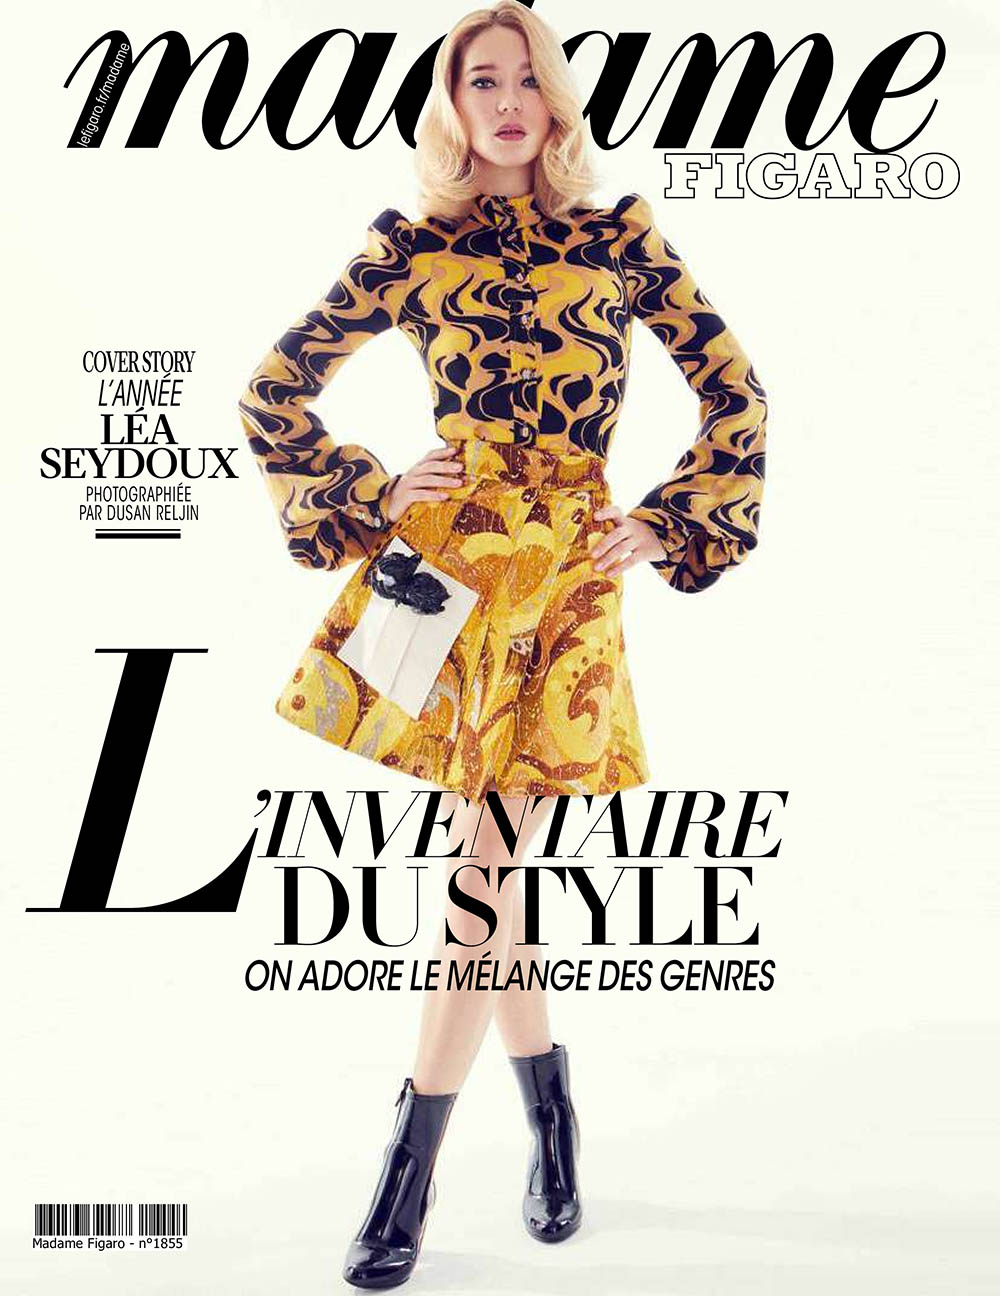 Léa Seydoux covers Madame Figaro March 13th, 2020 by Dusan Reljin